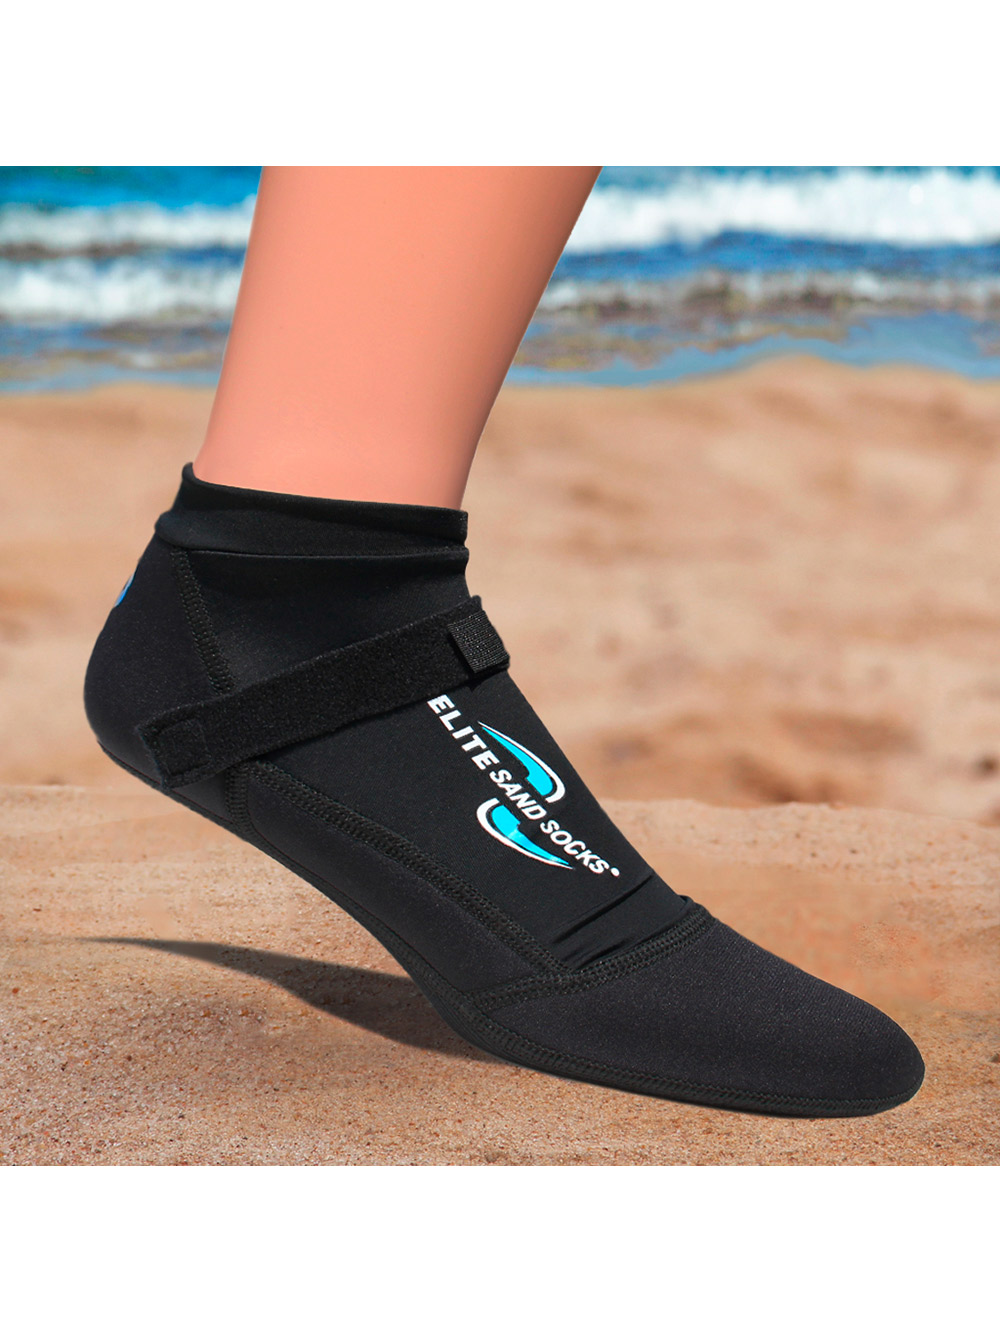 Sand Volleyball and Snorkeling New Open Box Details about   Sand Socks for Beach Soccer 